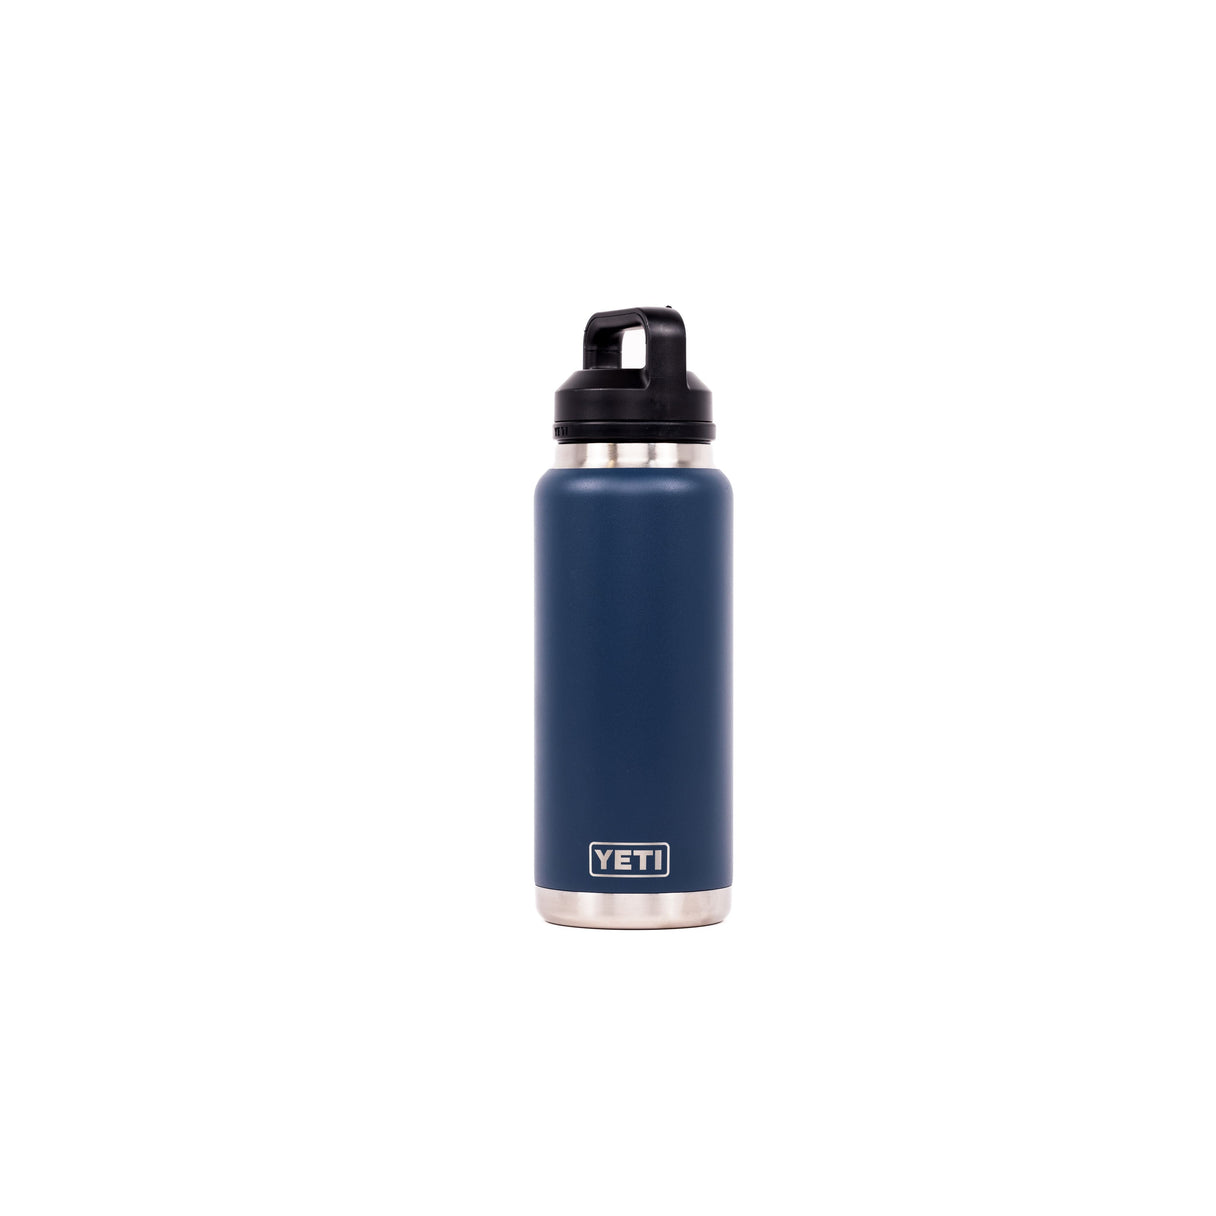  YETI - Insulated Beverage Containers / Vacuum Flasks